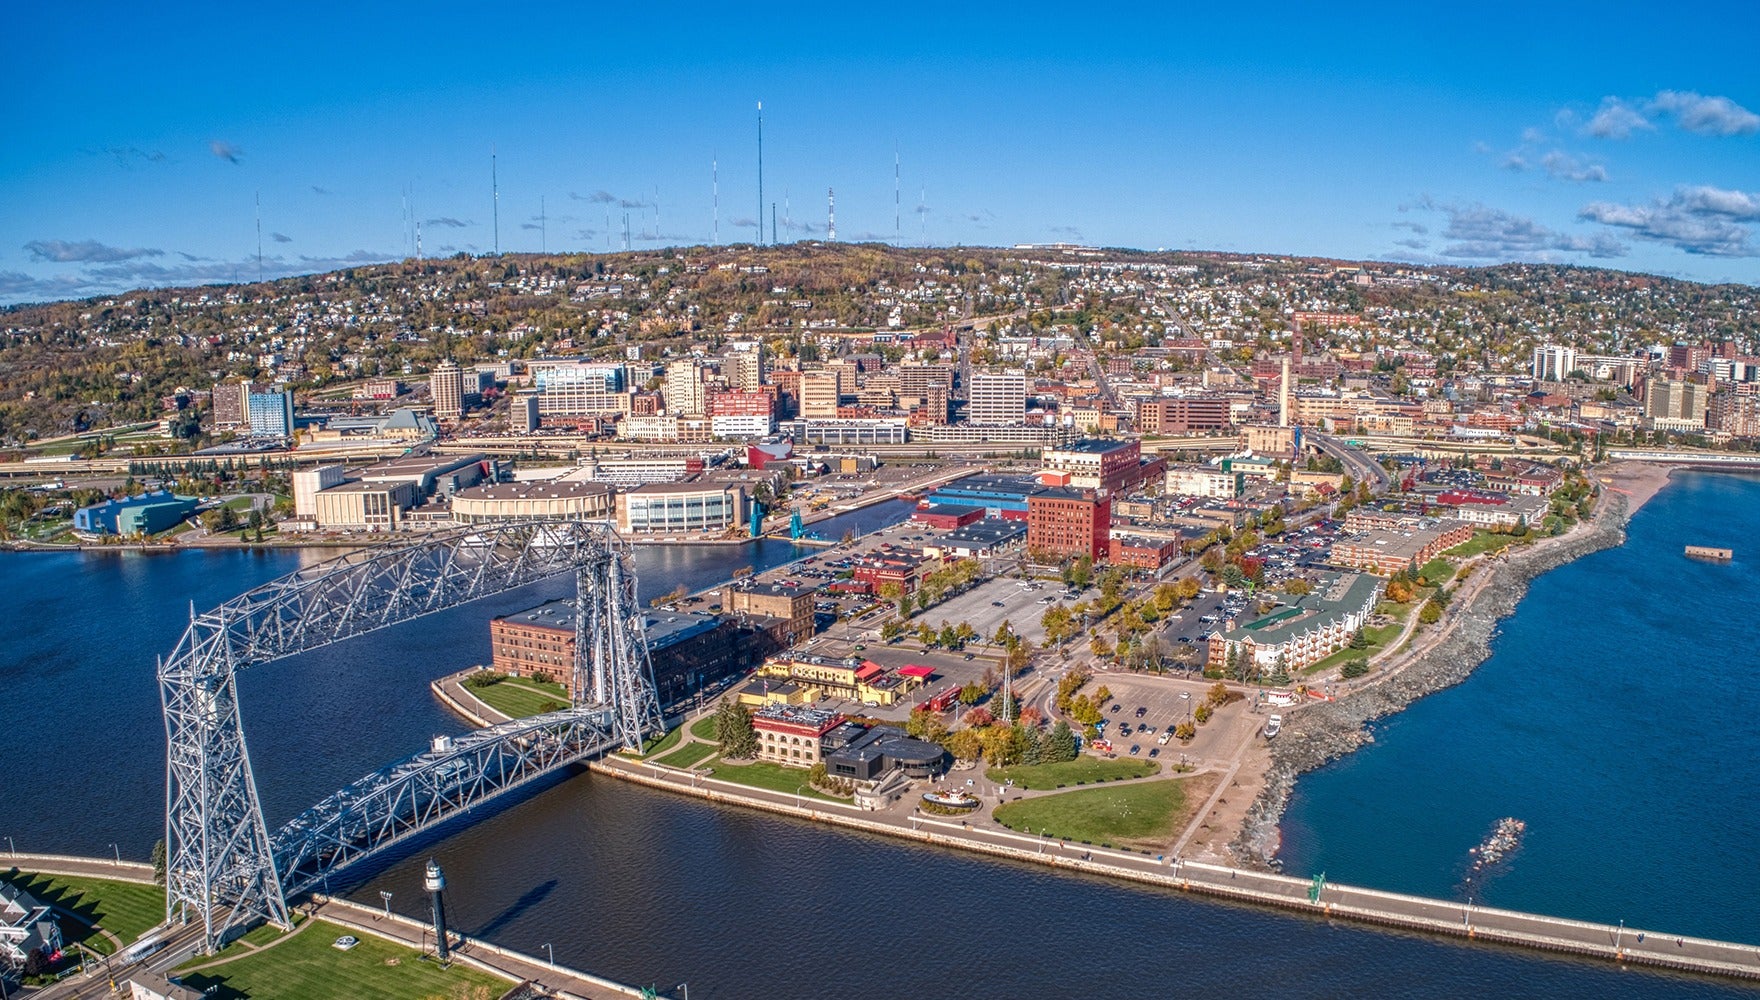 An Inside Look at the Town We Call “Home” – Duluth, Minnesota